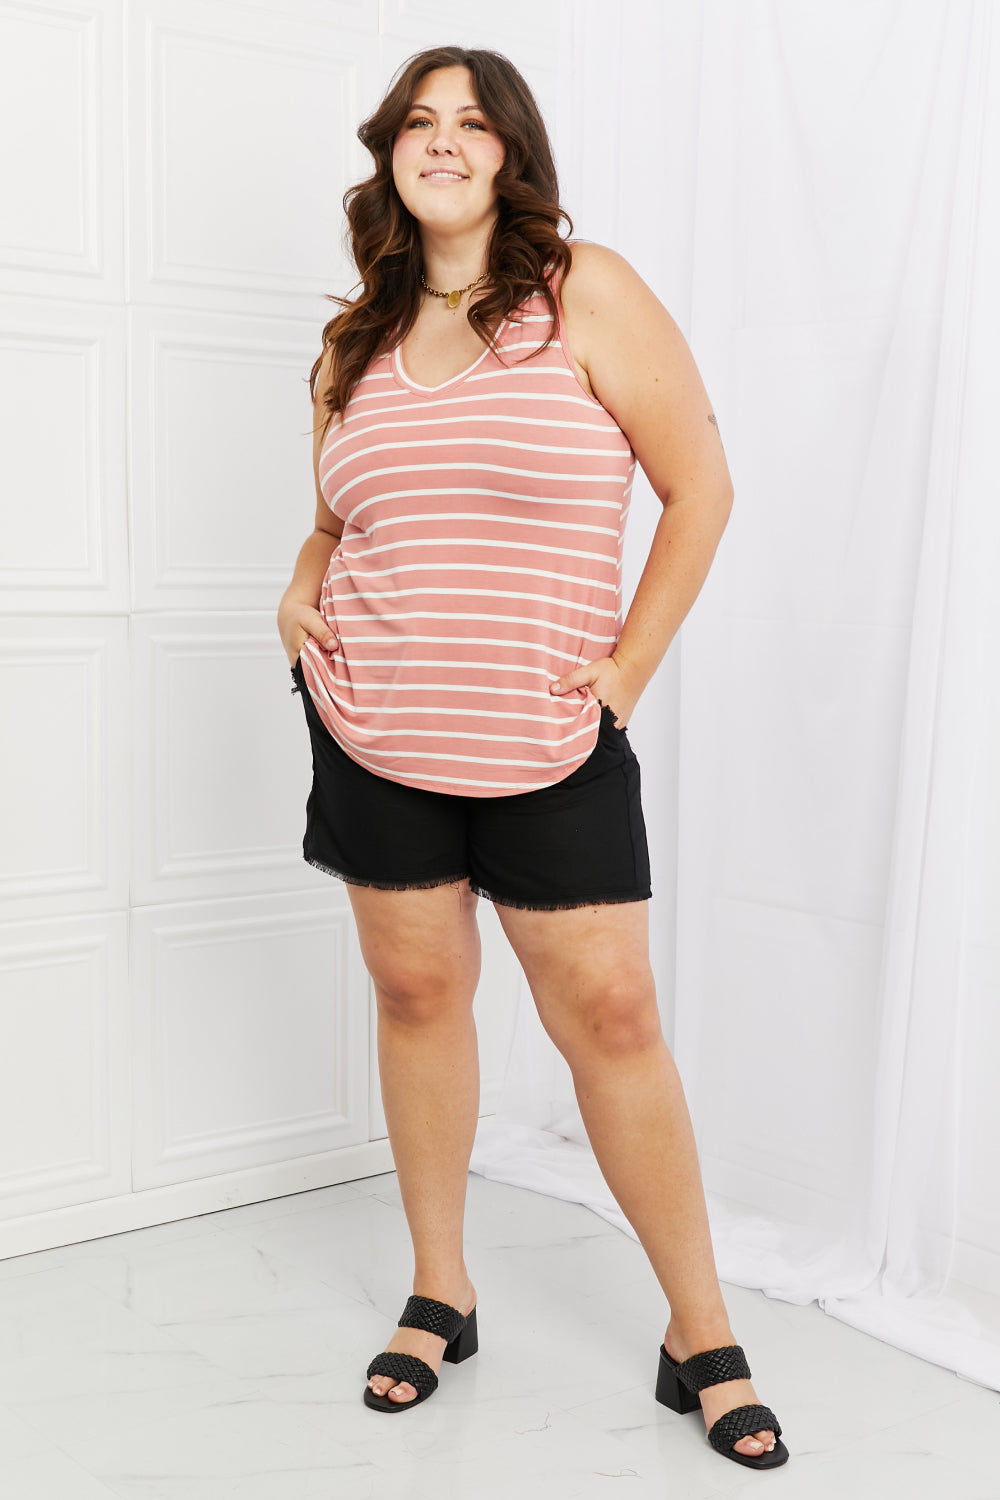 Find Your Path Full Size Sleeveless Striped Top